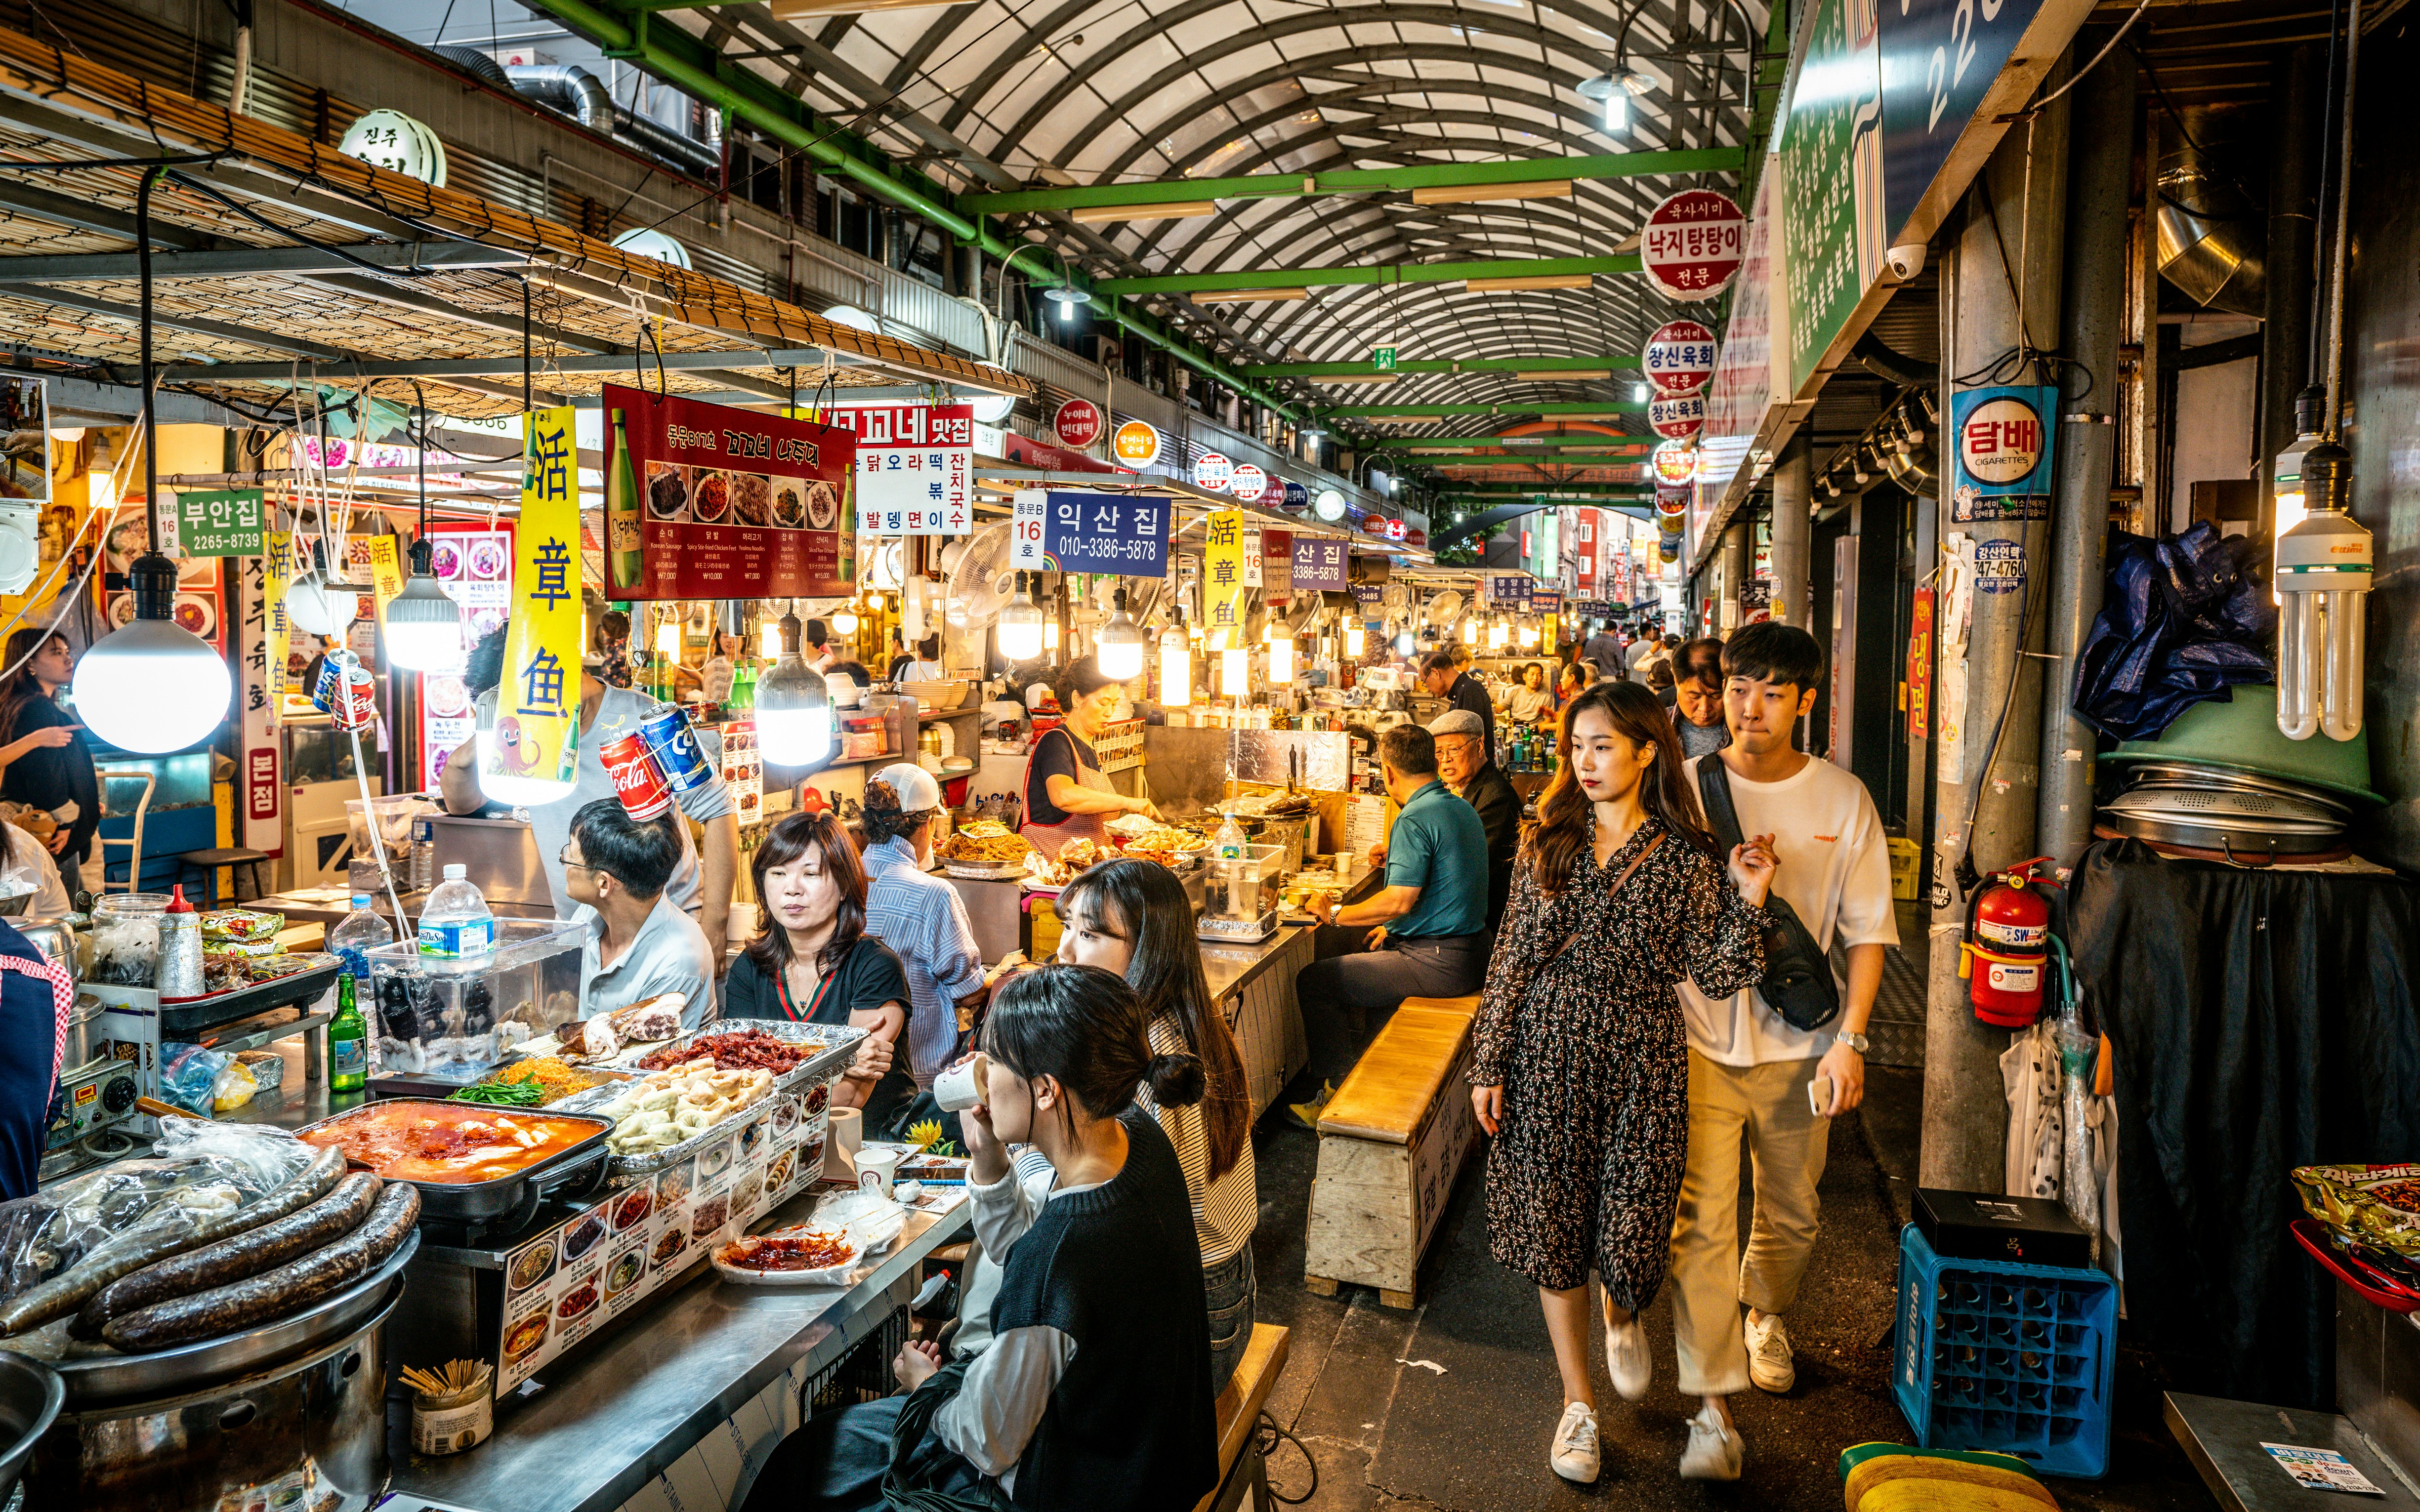 Rows of food stalls in a crowded marketplace in Seoul, South Korea